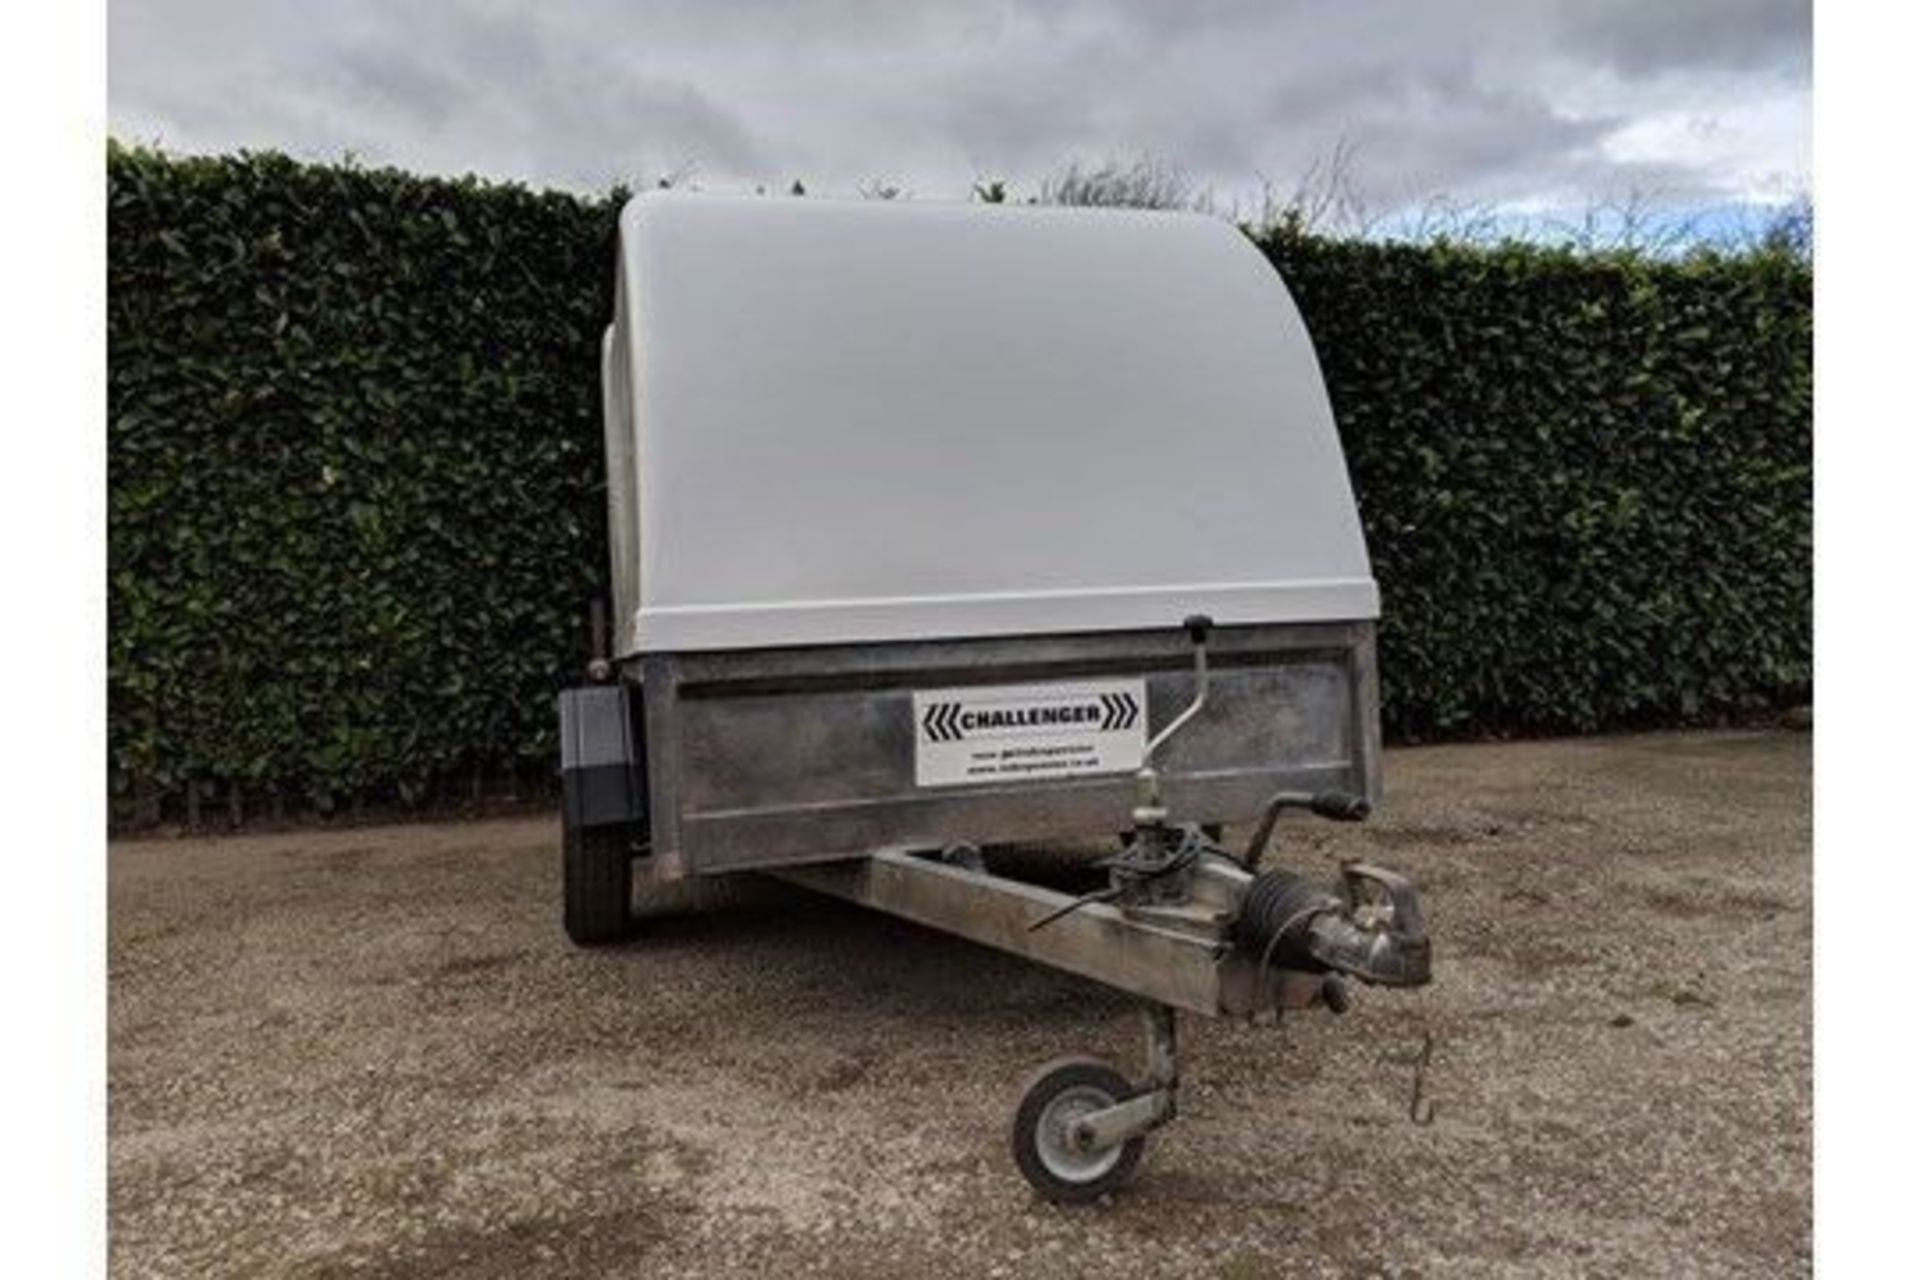 Indespension Challenger Single Axle 1300kg Box Trailer - Image 6 of 7